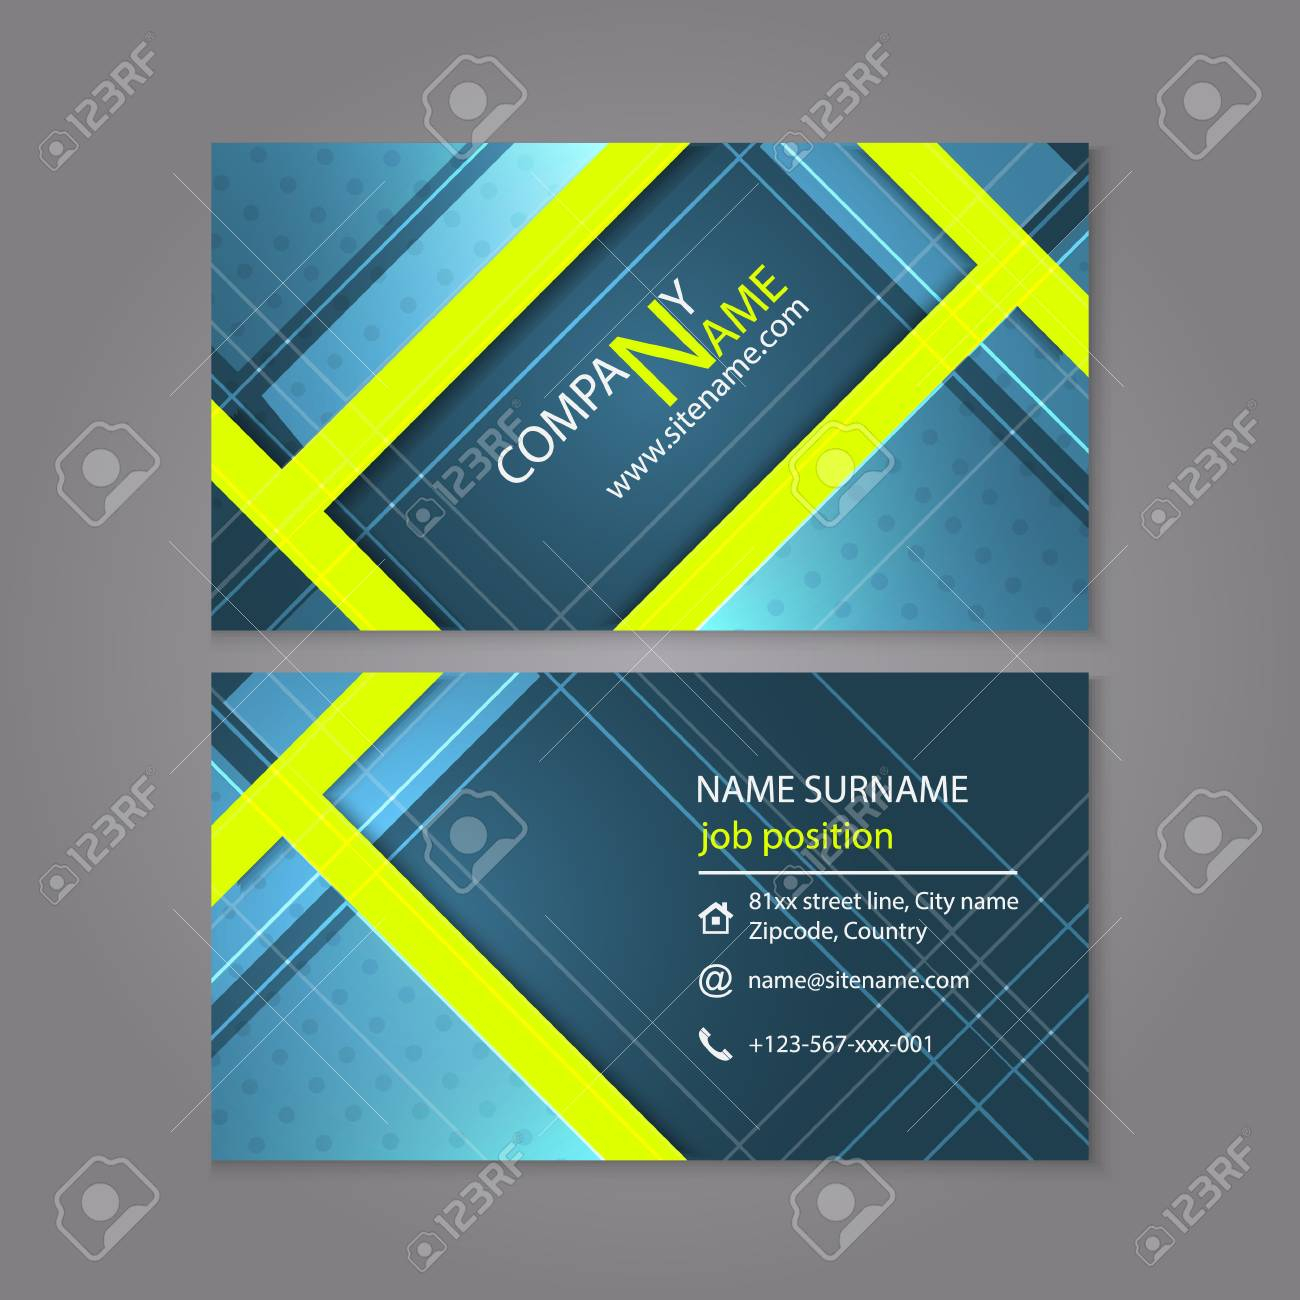 Professional Business Card Template Design Or Visiting Card Set For Professional Name Card Template